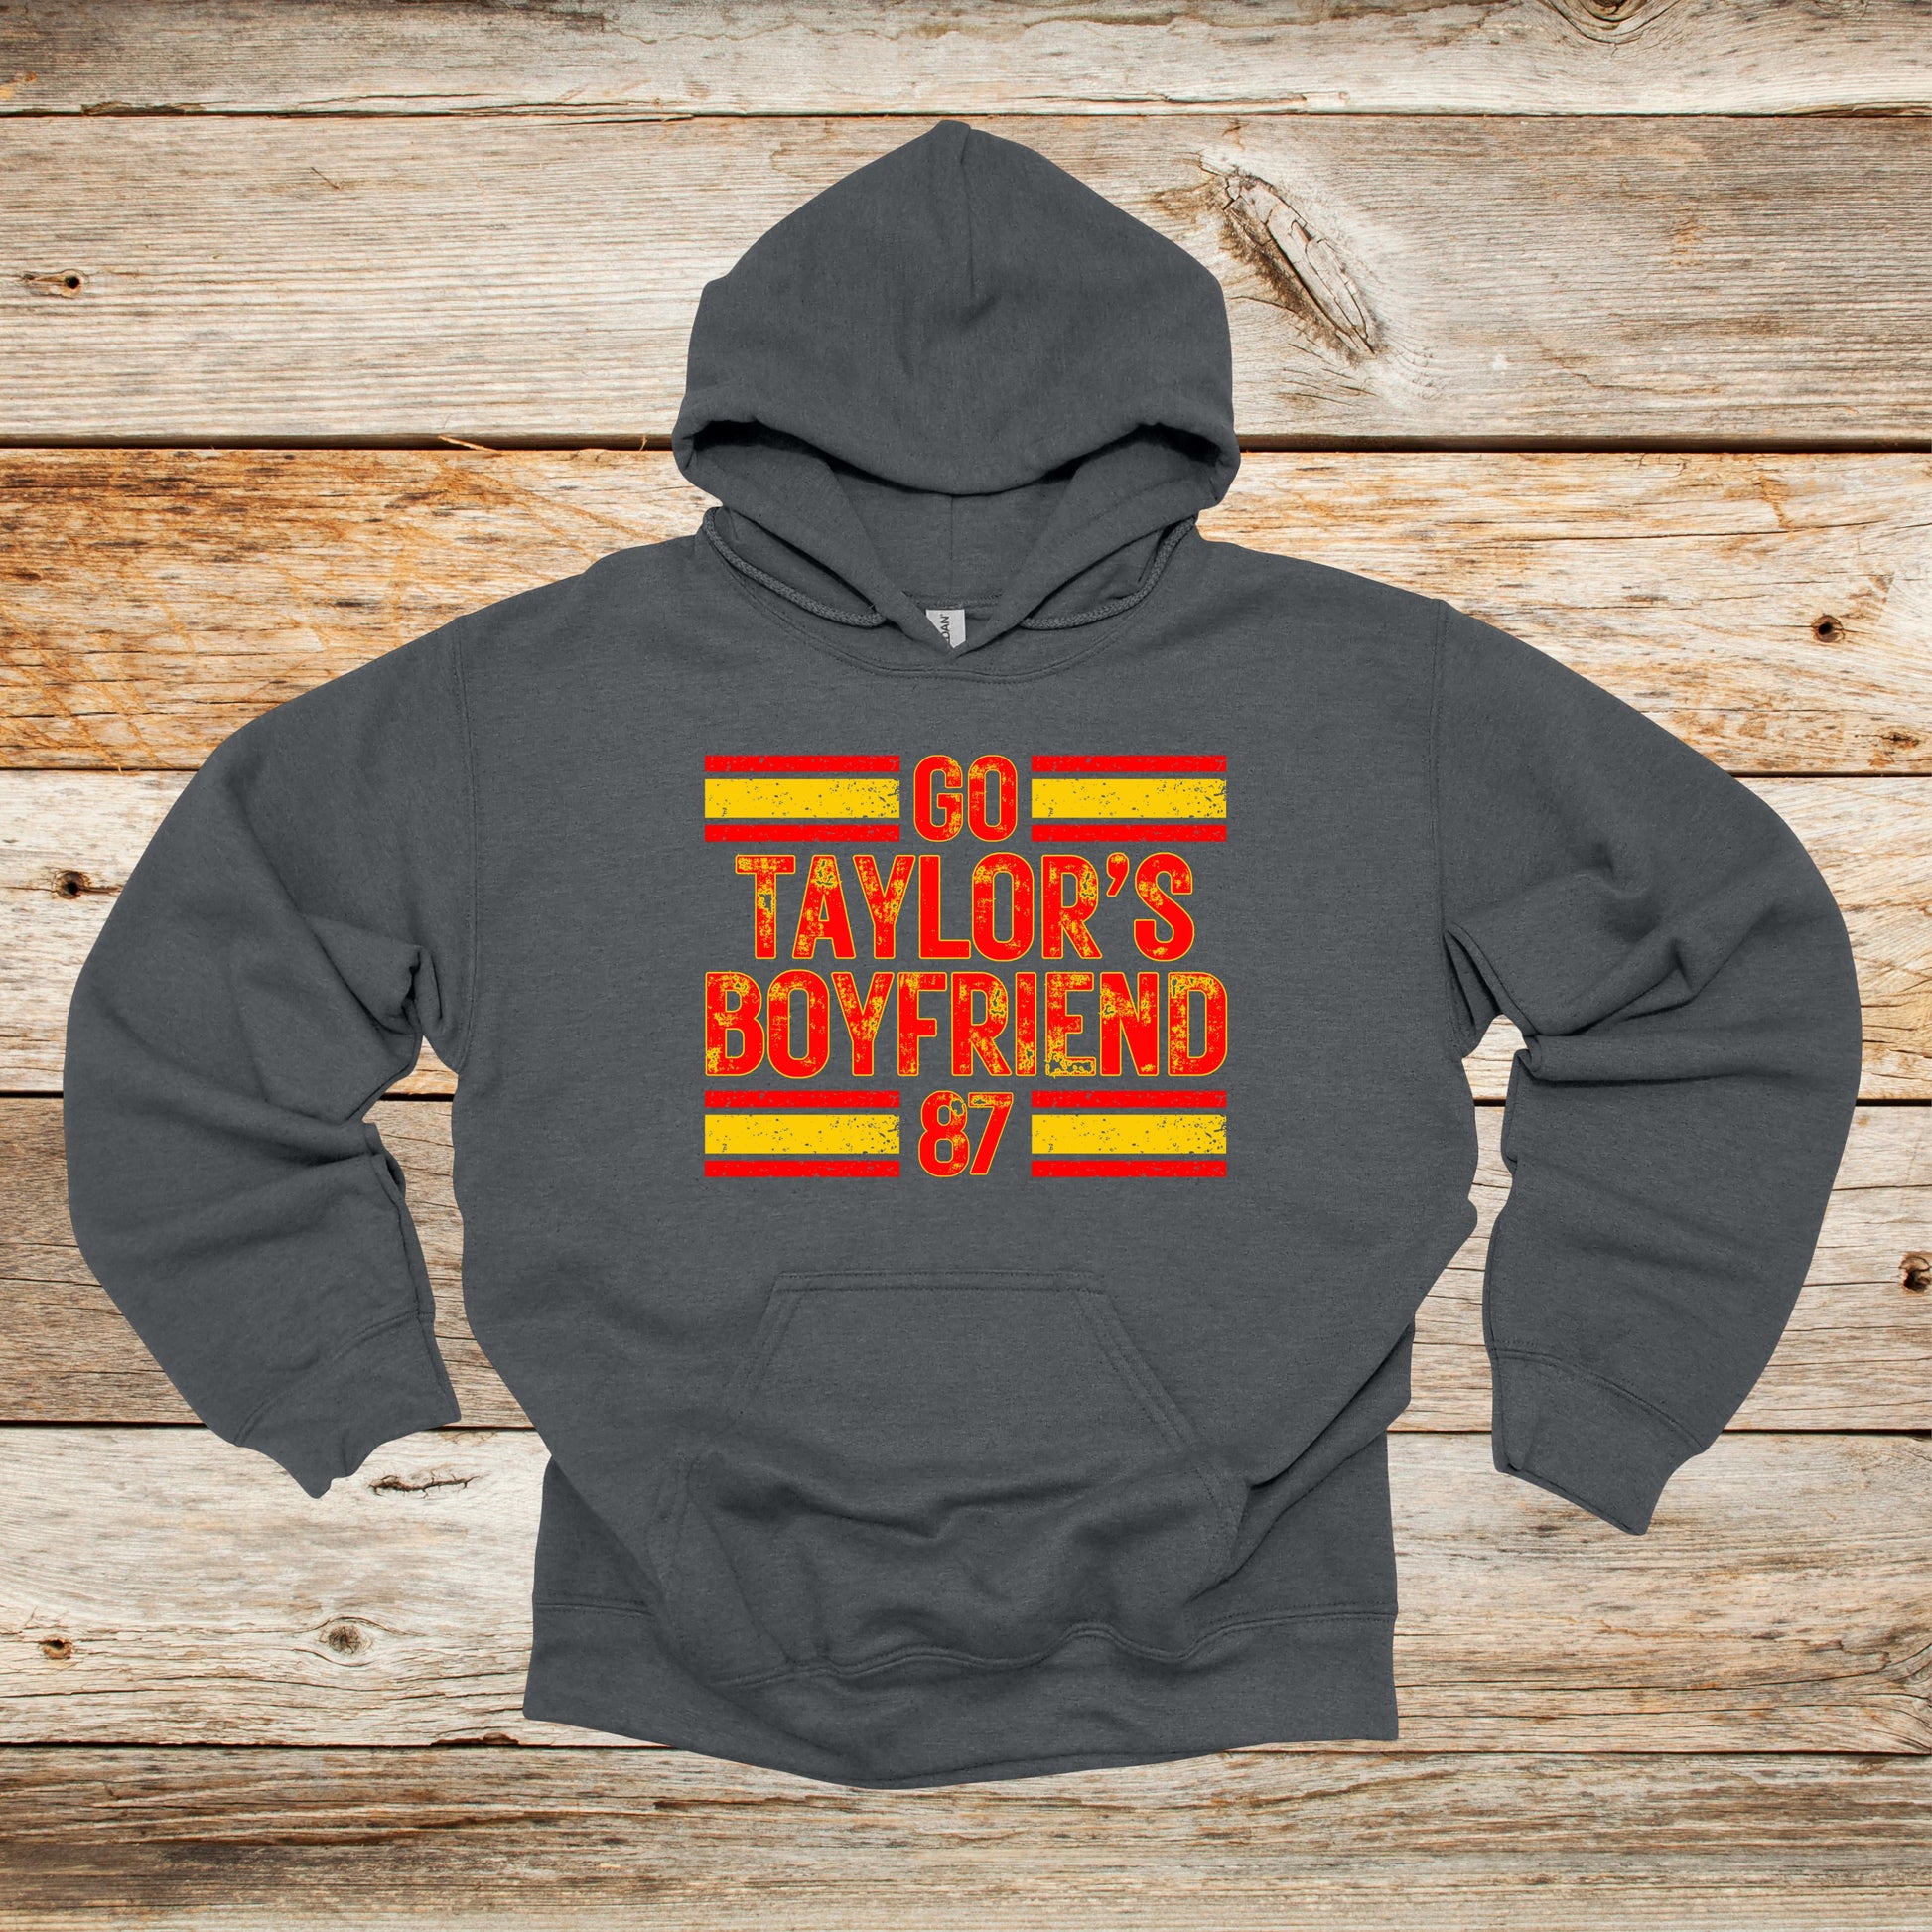 Football Crewneck and Hooded Sweatshirt - Kansas City Chiefs Football - Go Taylor's Boyfriend - Adult and Children's Tee Shirts - Sports Hooded Sweatshirt Graphic Avenue Hooded Sweatshirt Dark Heather Adult Small